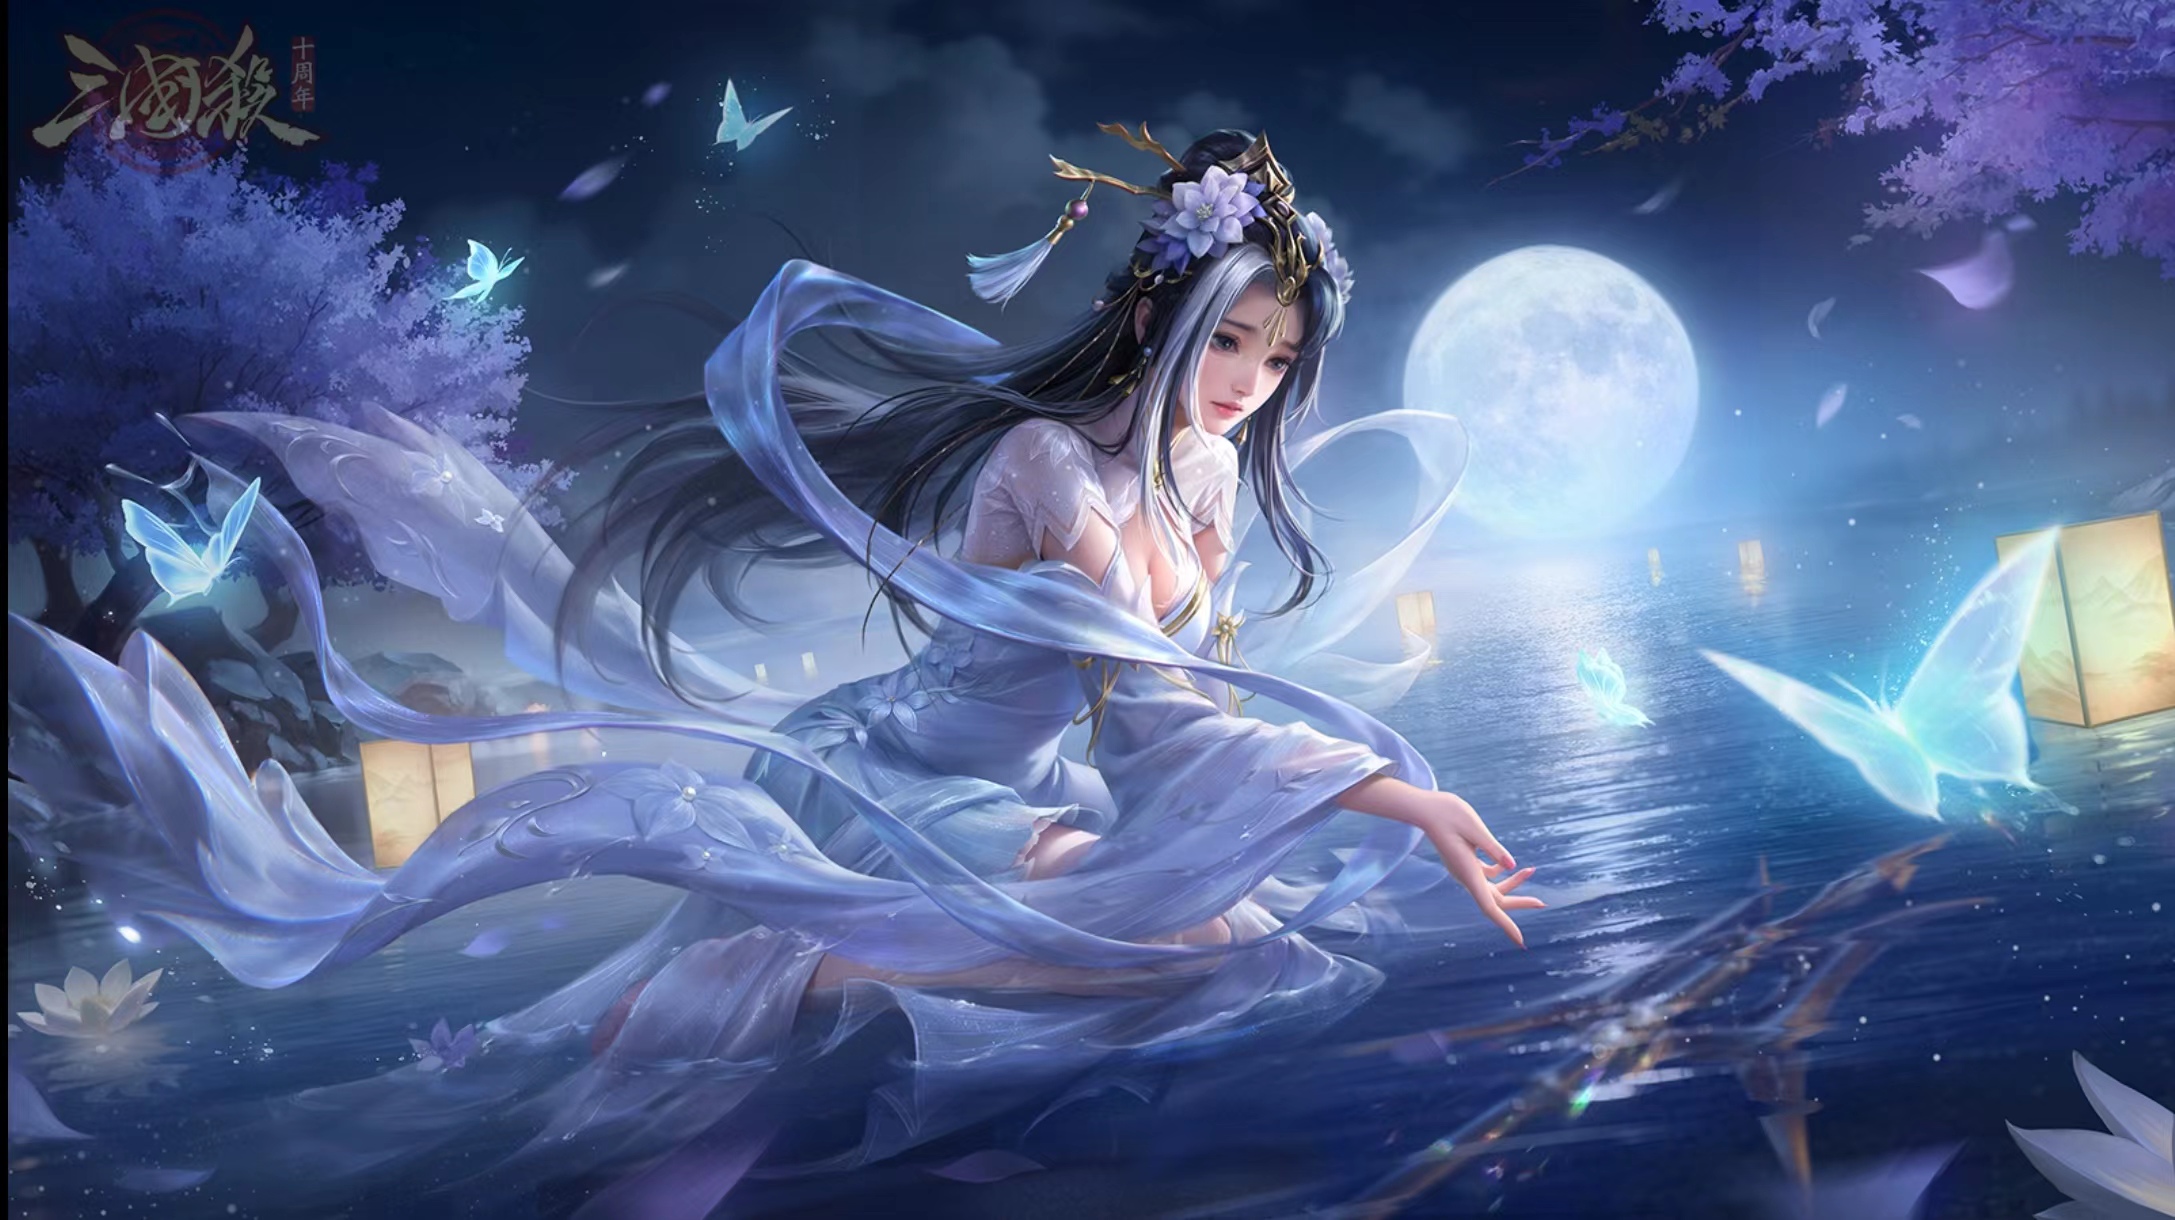 Anime 2175x1220 Chinese clothing anime sanguosha anime girls Moon moonlight water petals lantern dress cleavage long hair video game characters butterfly video game art sky clouds earring Three Kingdoms